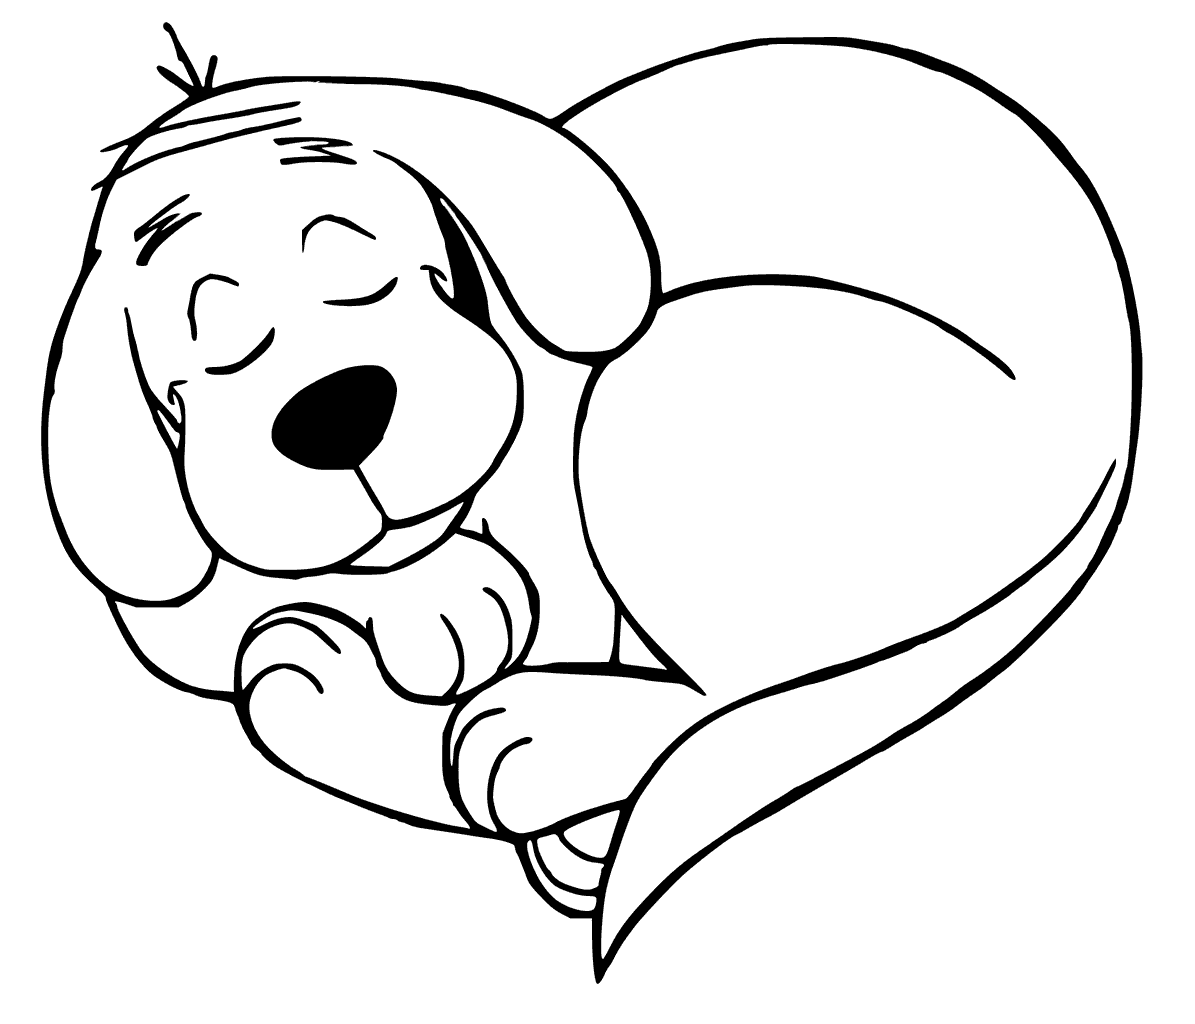 Clifford Sleeping Coloring Page